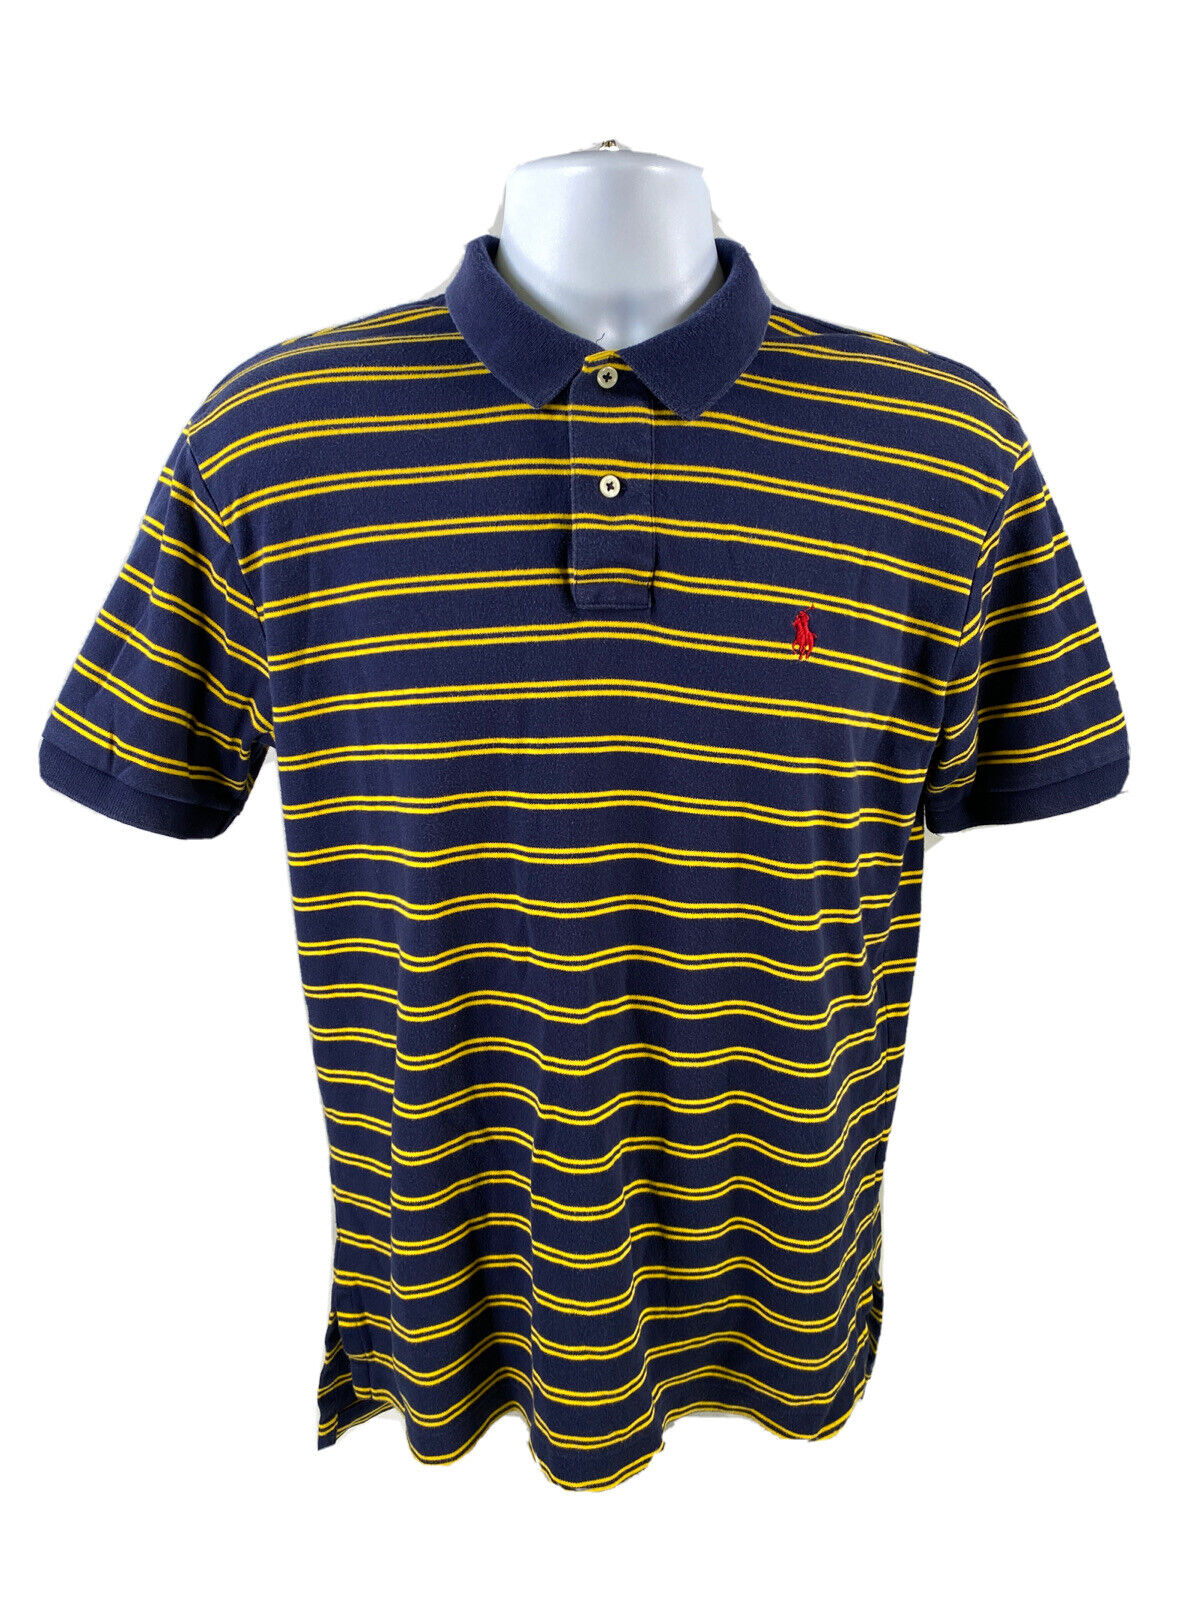 Polo by Ralph Lauren Men's Blue/Yellow Striped Short Sleeve Polo - M